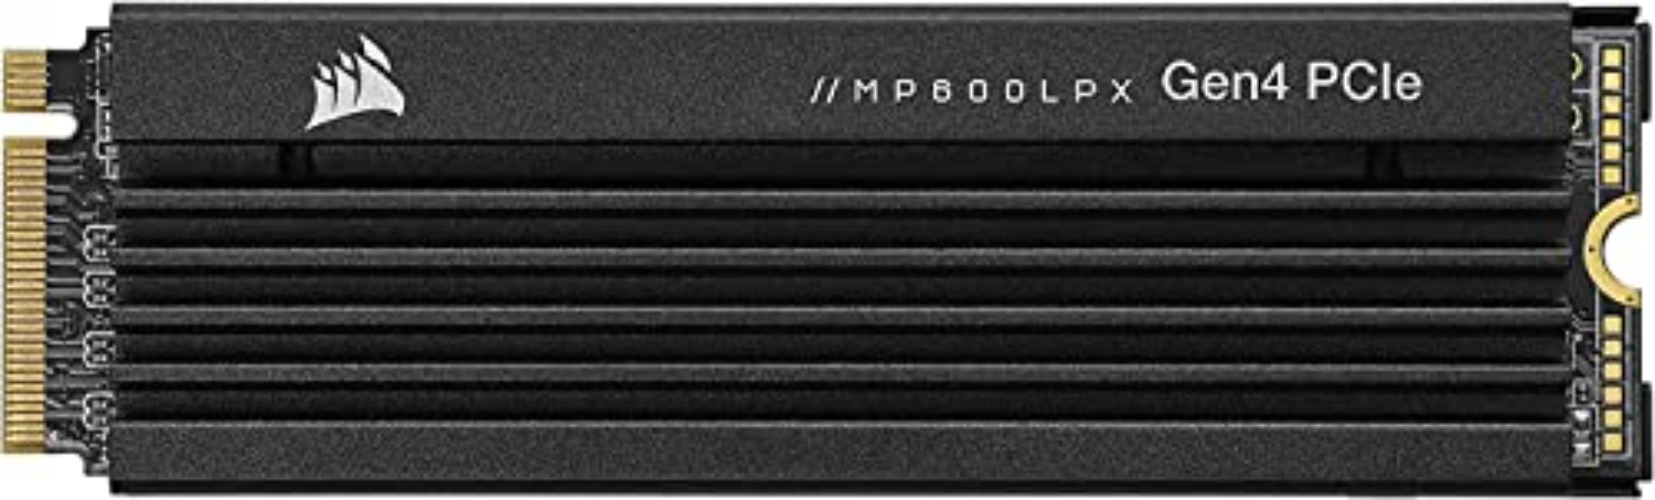 Corsair MP600 PRO LPX 4TB M.2 NVMe PCIe x4 Gen4 SSD - Optimized for PS5 (Up to 7,100MB/sec Sequential Read & 6,800MB/sec Sequential Write Speeds, High-Speed Interface, Compact Form Factor) Black - 4TB - Black